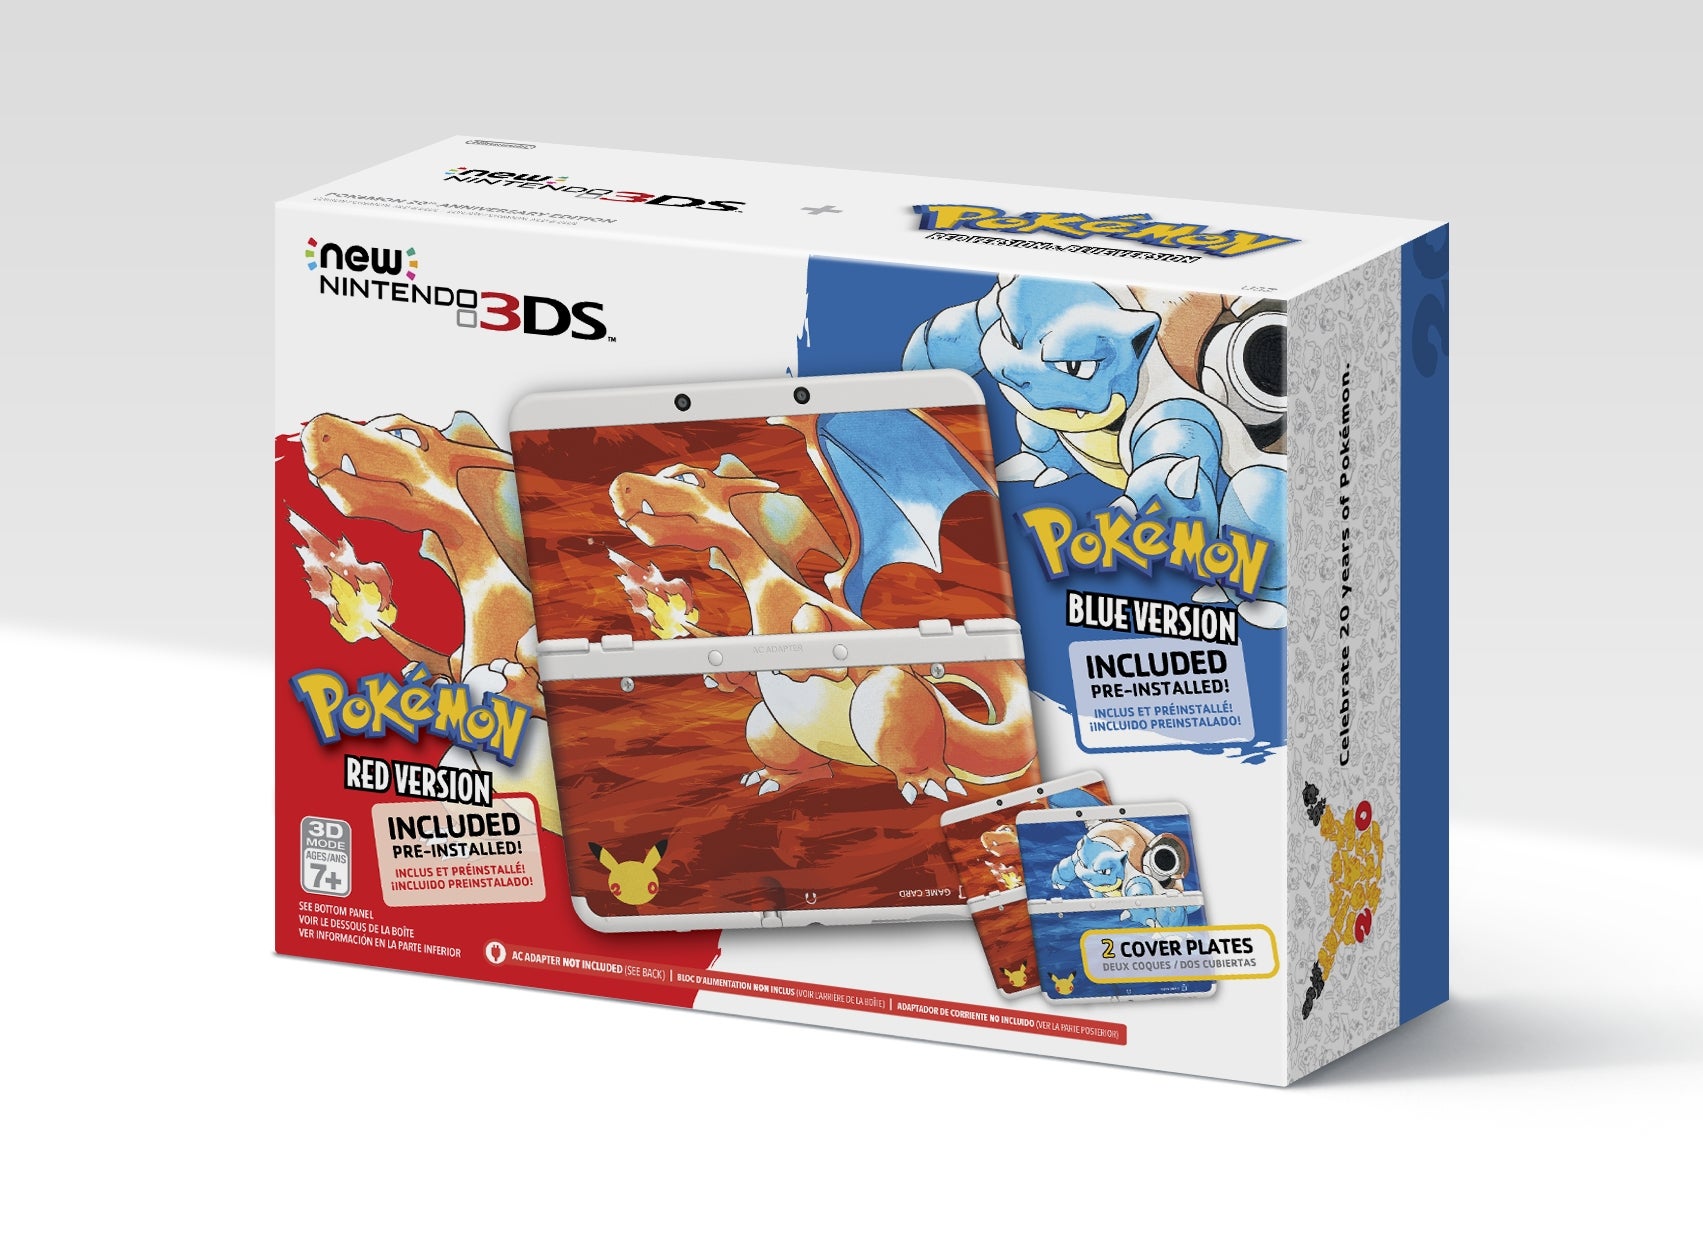 The new 3DS is one of many things the Pokemon Company and Nintendo have planned to celebrate 20 years of the series